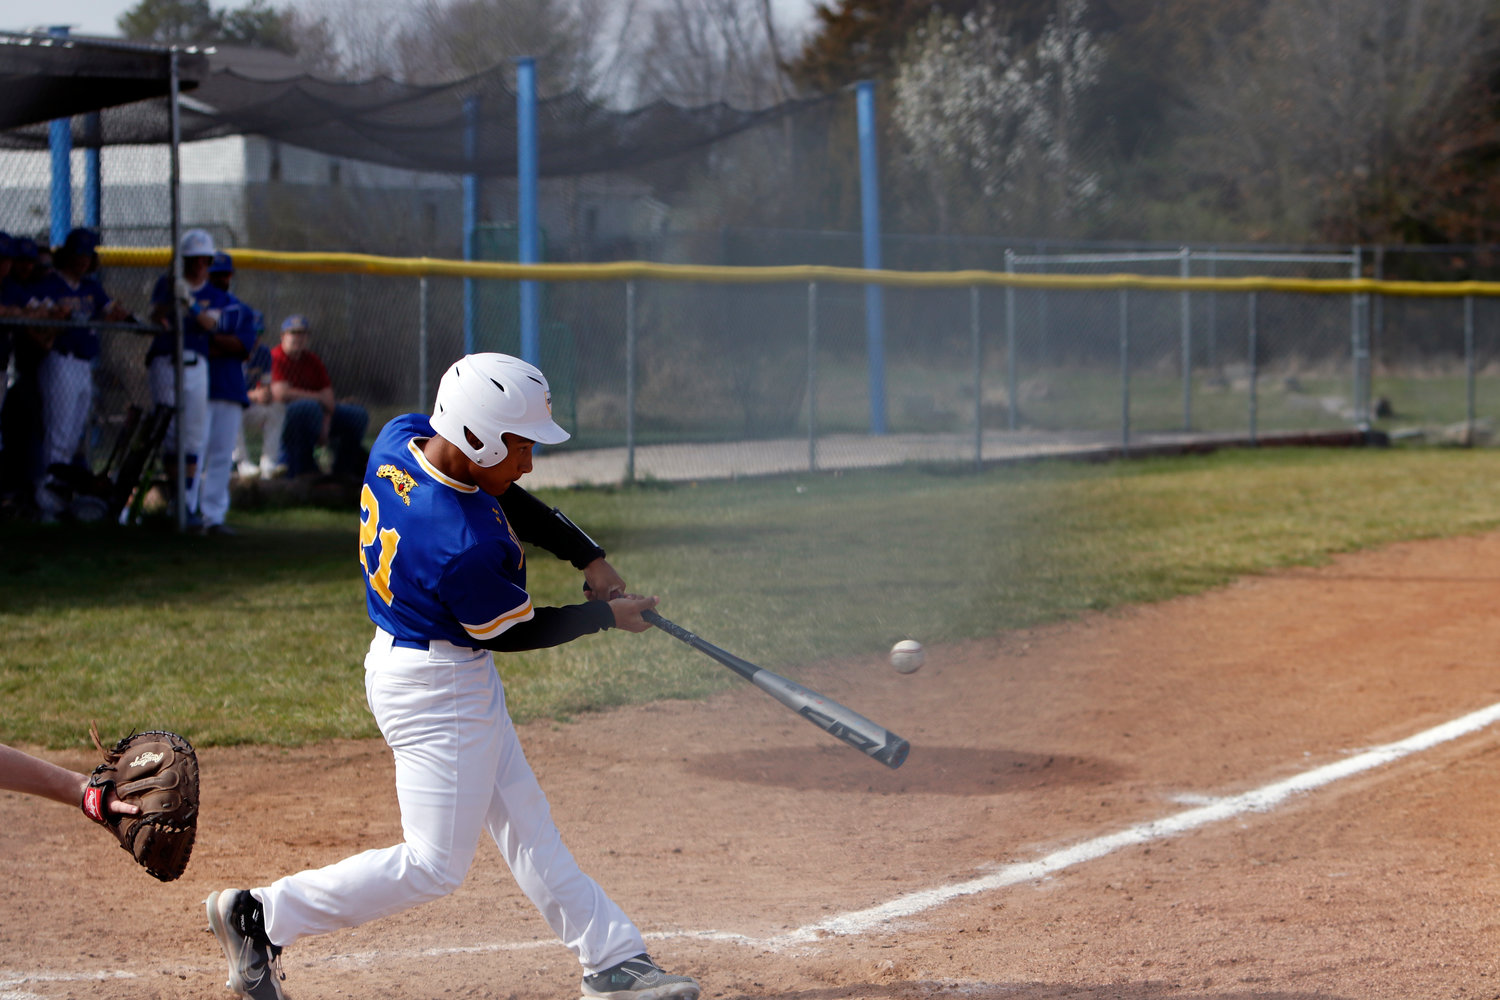 Duan McRoberts swings at a pitch during a game earlier this season.